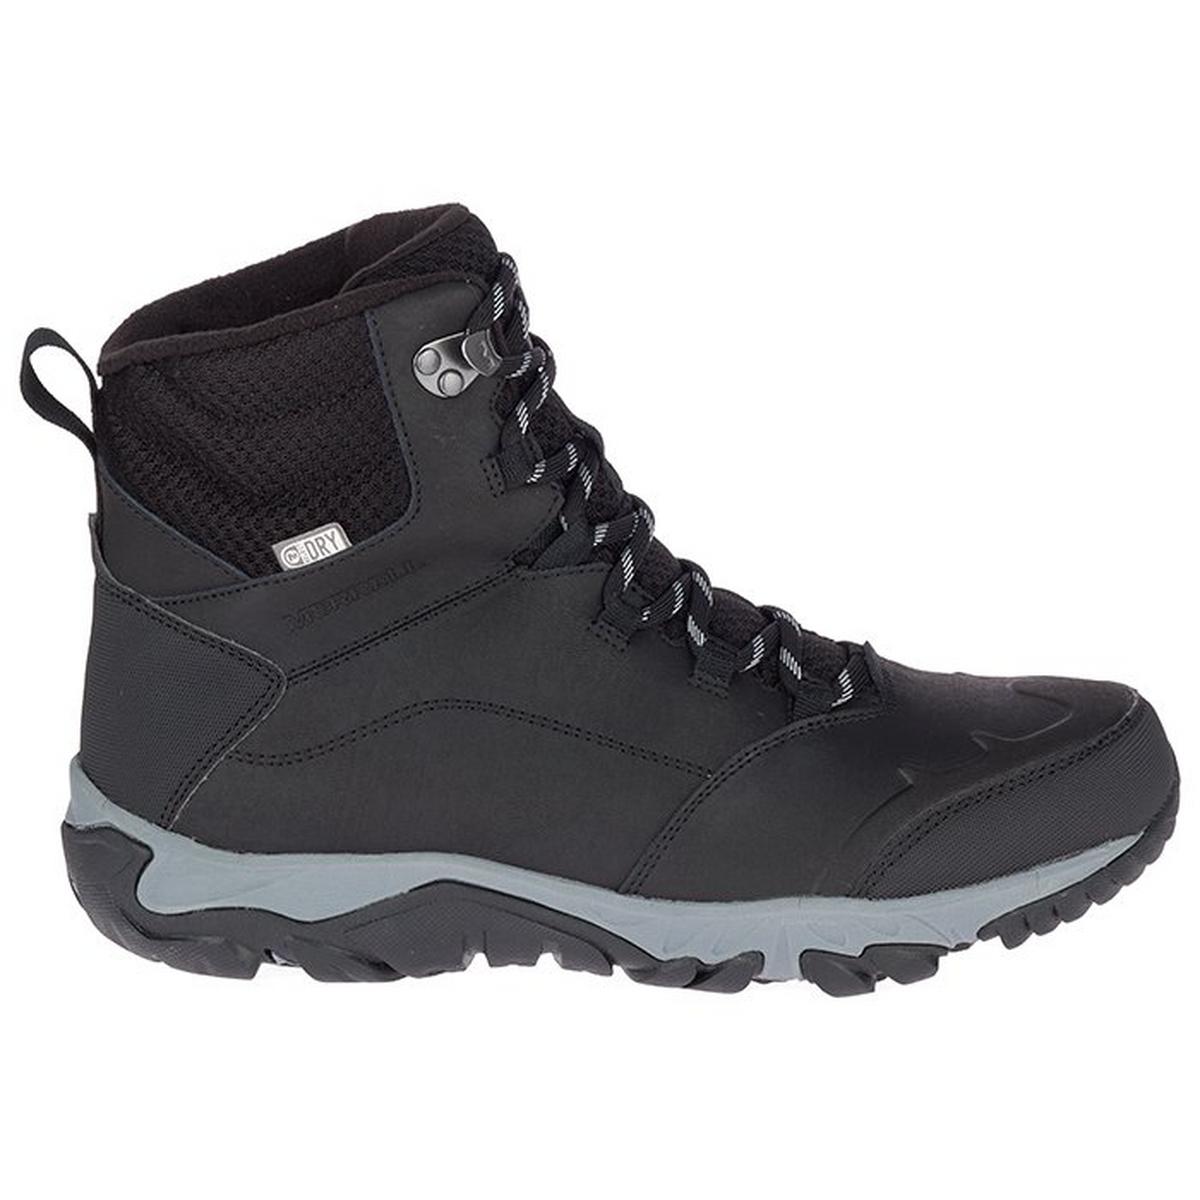 Men's Thermo Fractal Mid Waterproof Boot